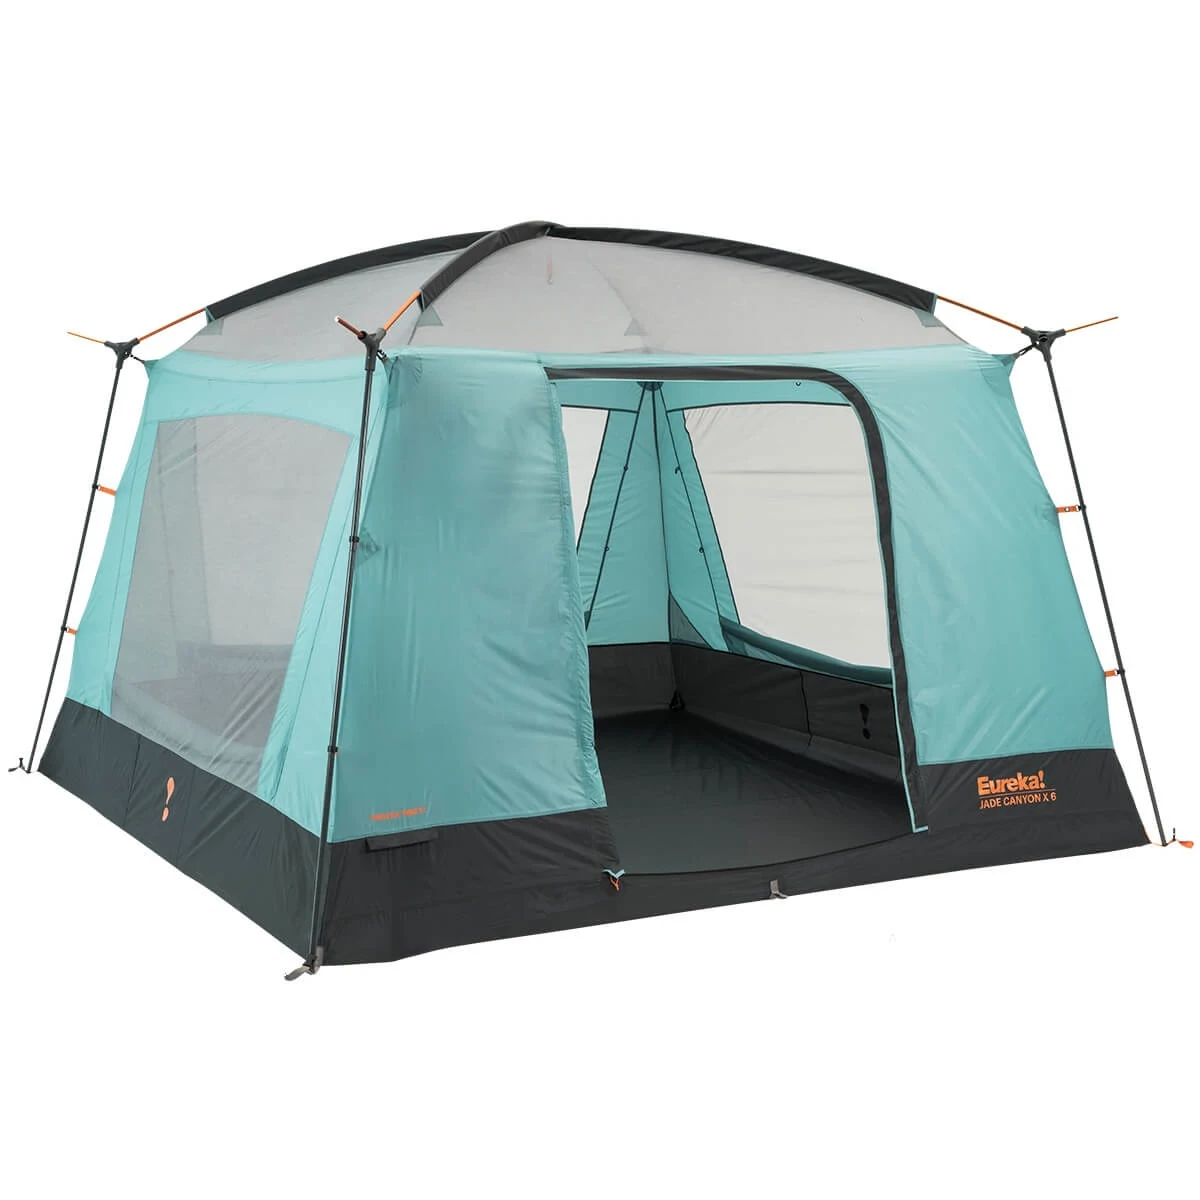 Jade Canyon X6 tent with rainfly off and door open